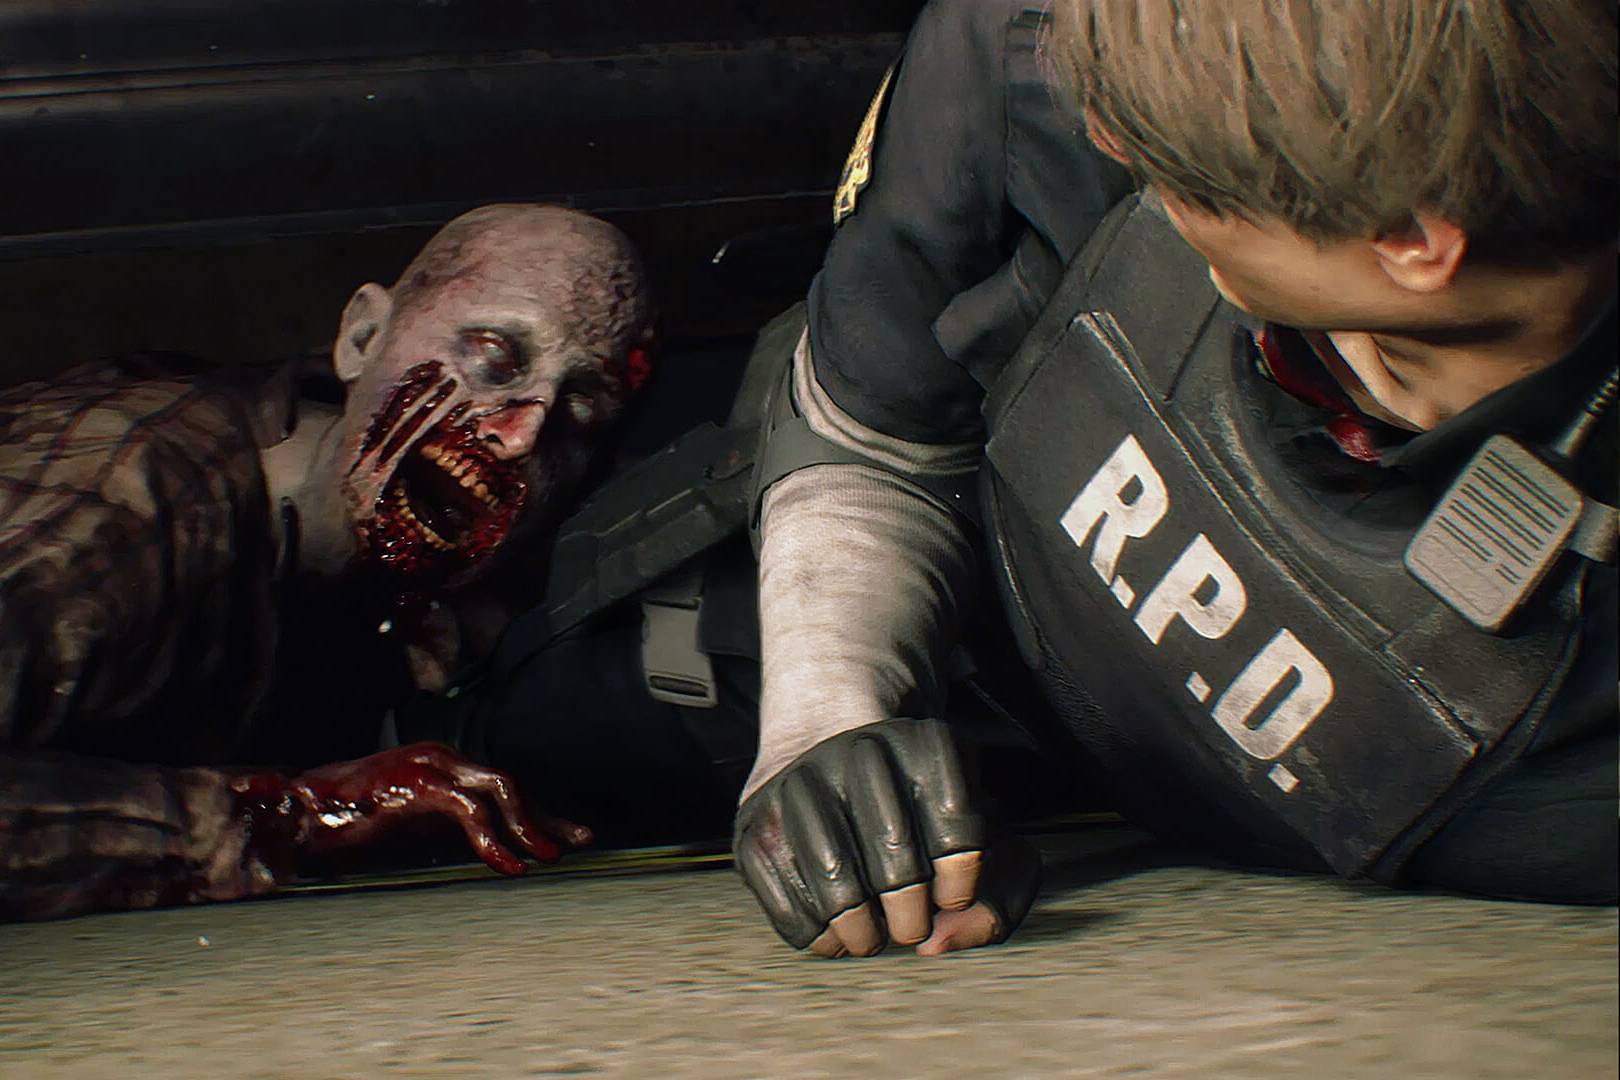 The Resident Evil 2 remake pushes claustrophobic horror to the brink